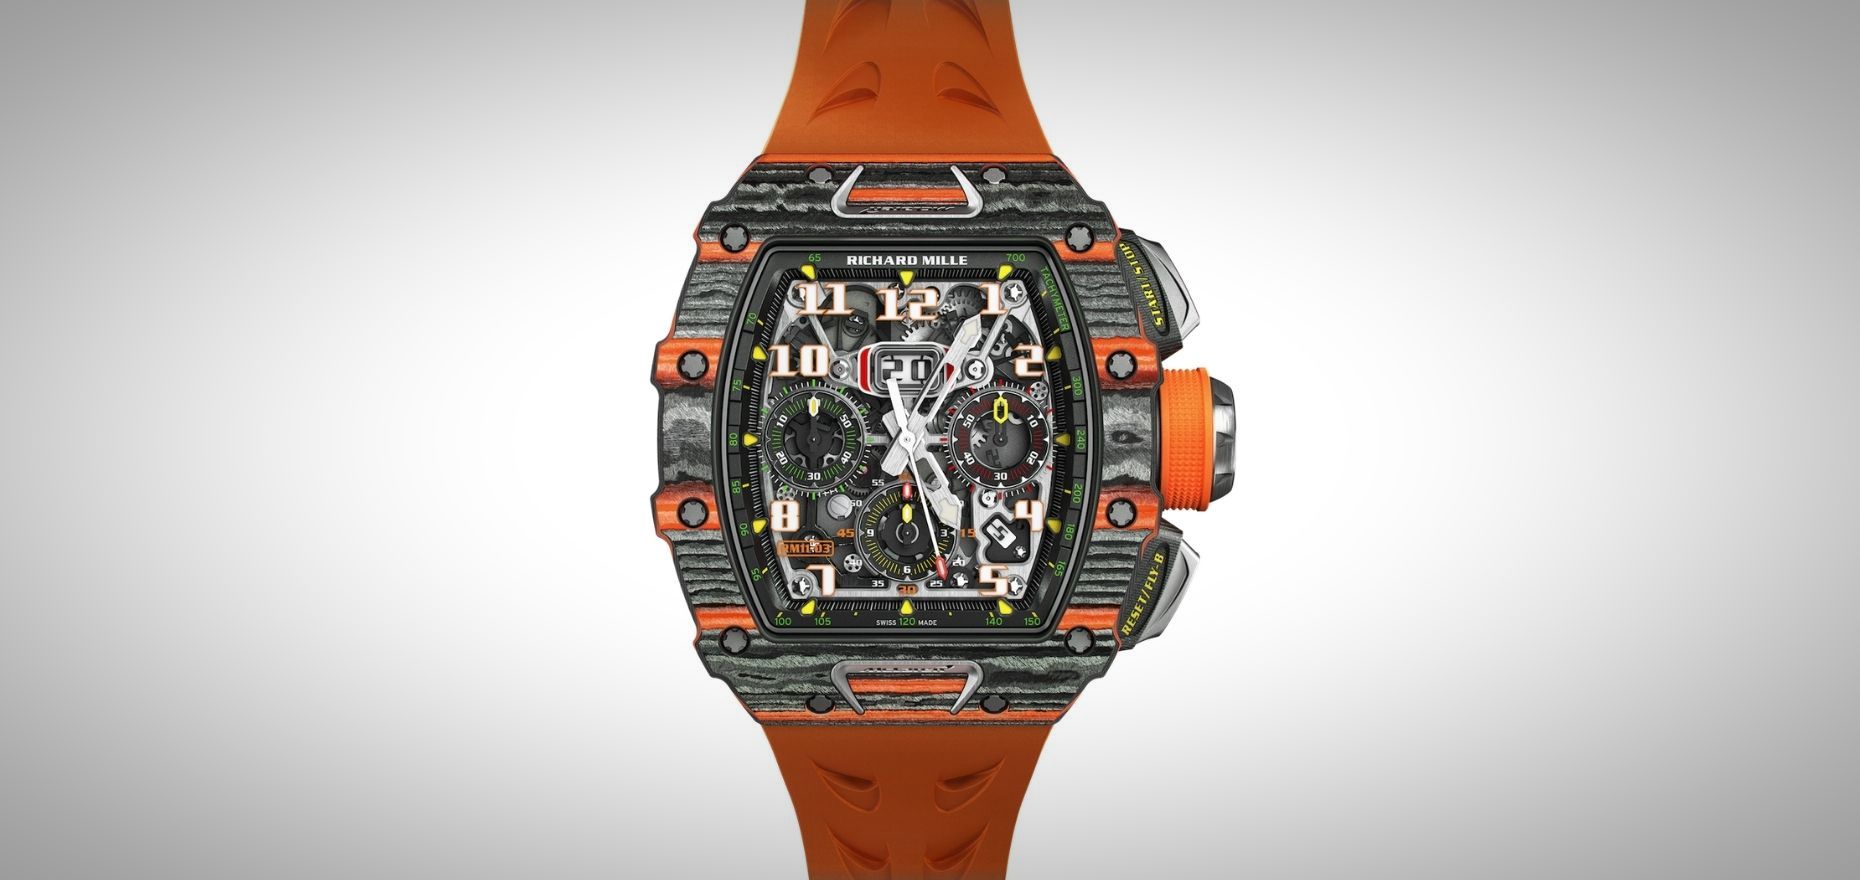 Richard Mille Watches – Innovative high-performance watches or mere status symbols for the super rich?